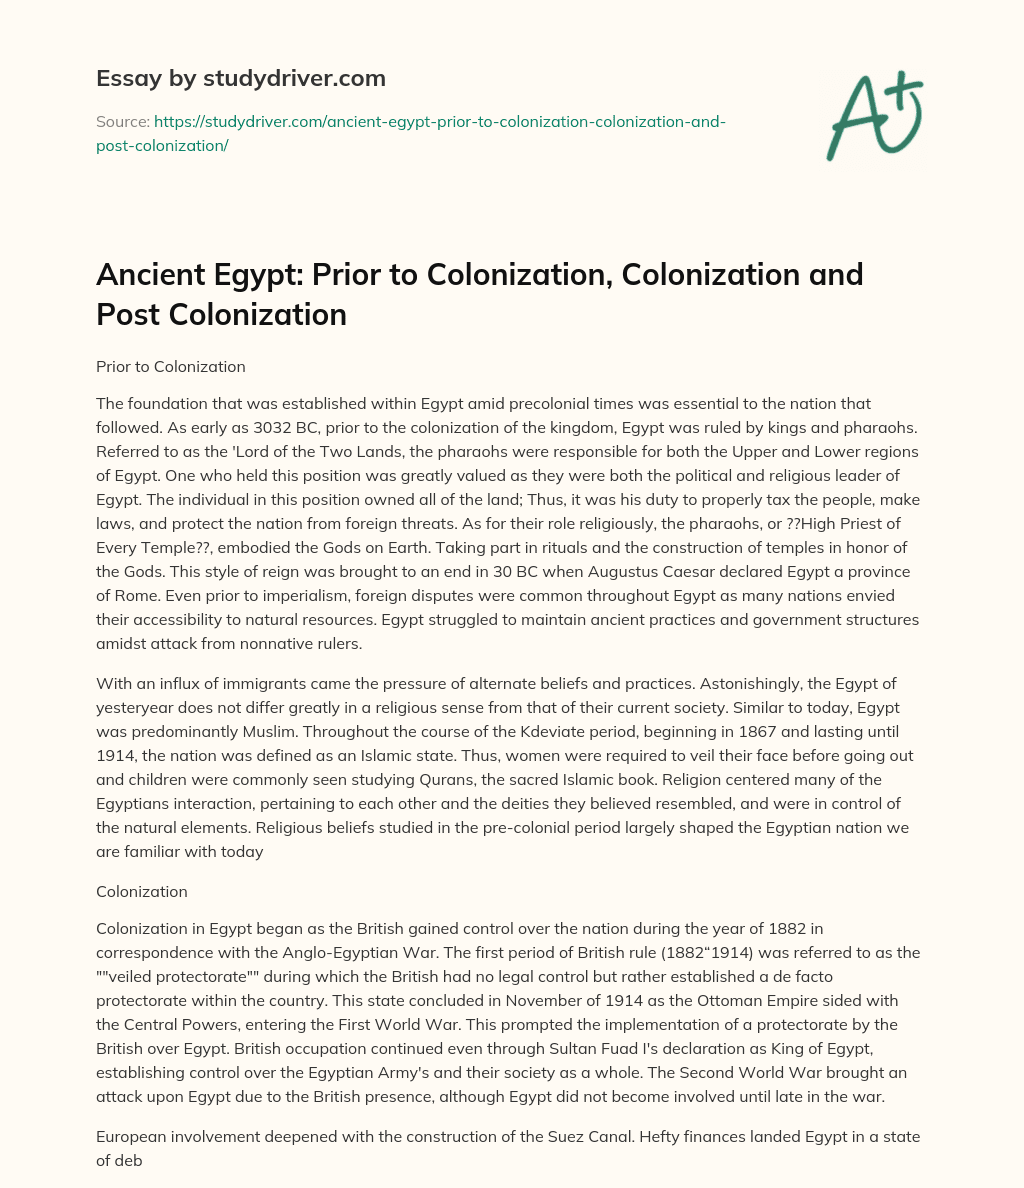 Ancient Egypt: Prior to Colonization, Colonization and Post Colonization essay